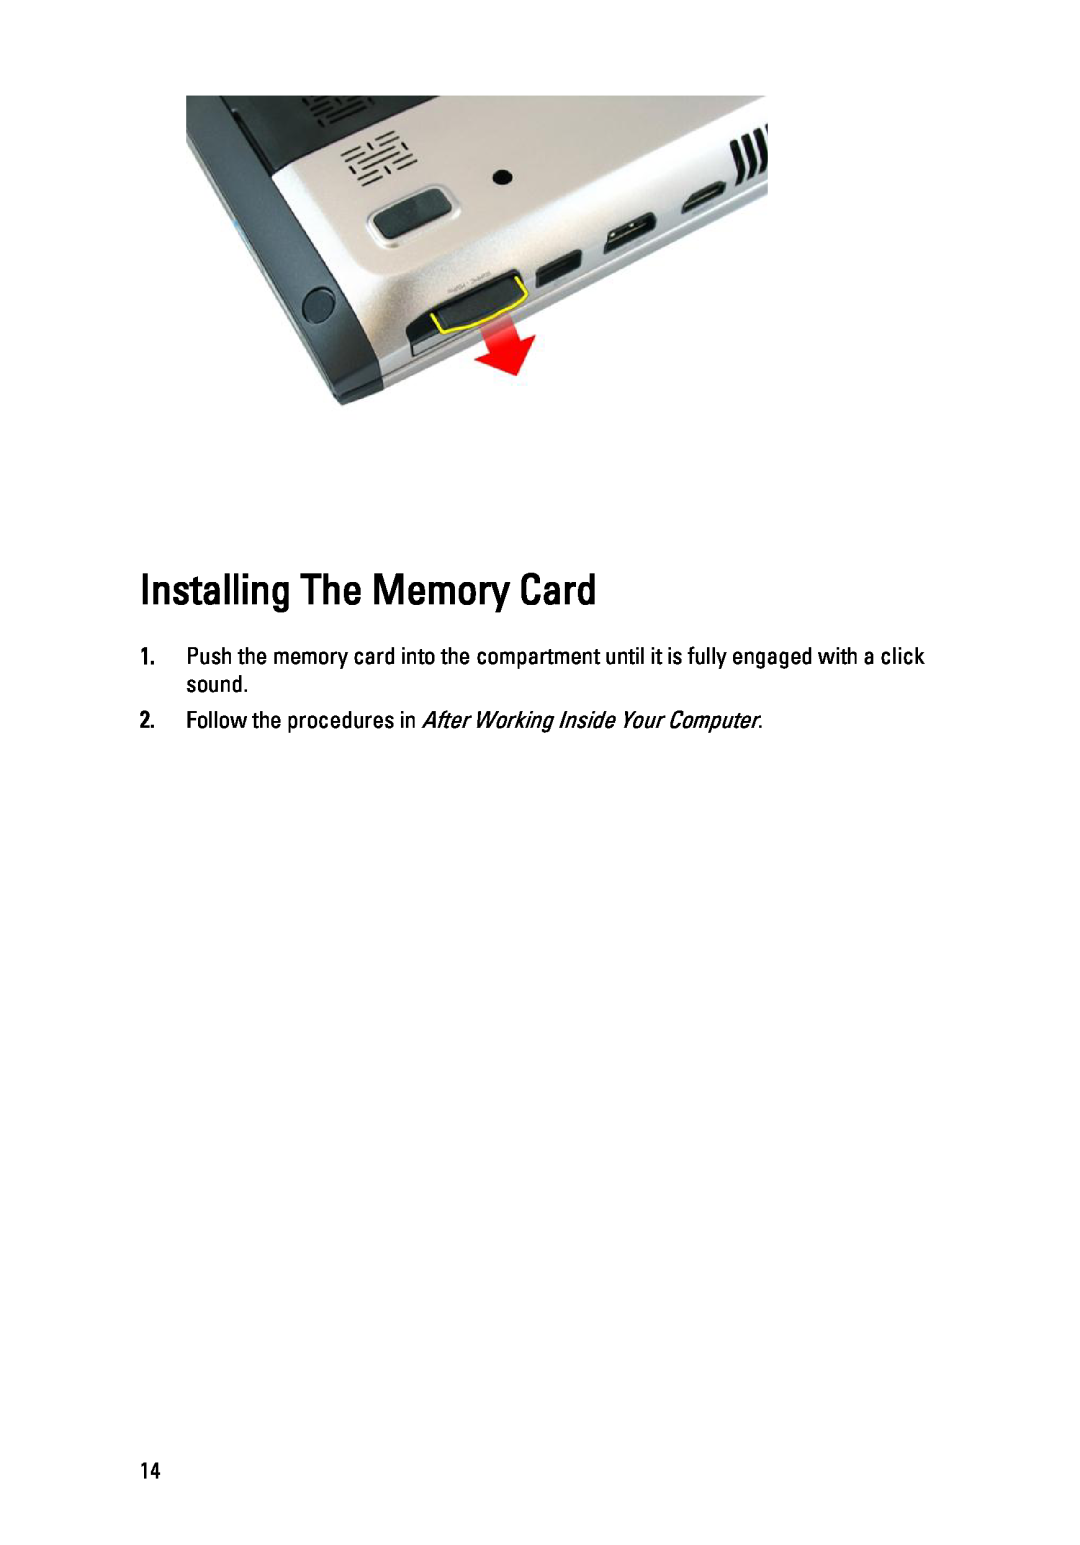 Dell 3450 owner manual Installing The Memory Card, Follow the procedures in After Working Inside Your Computer 